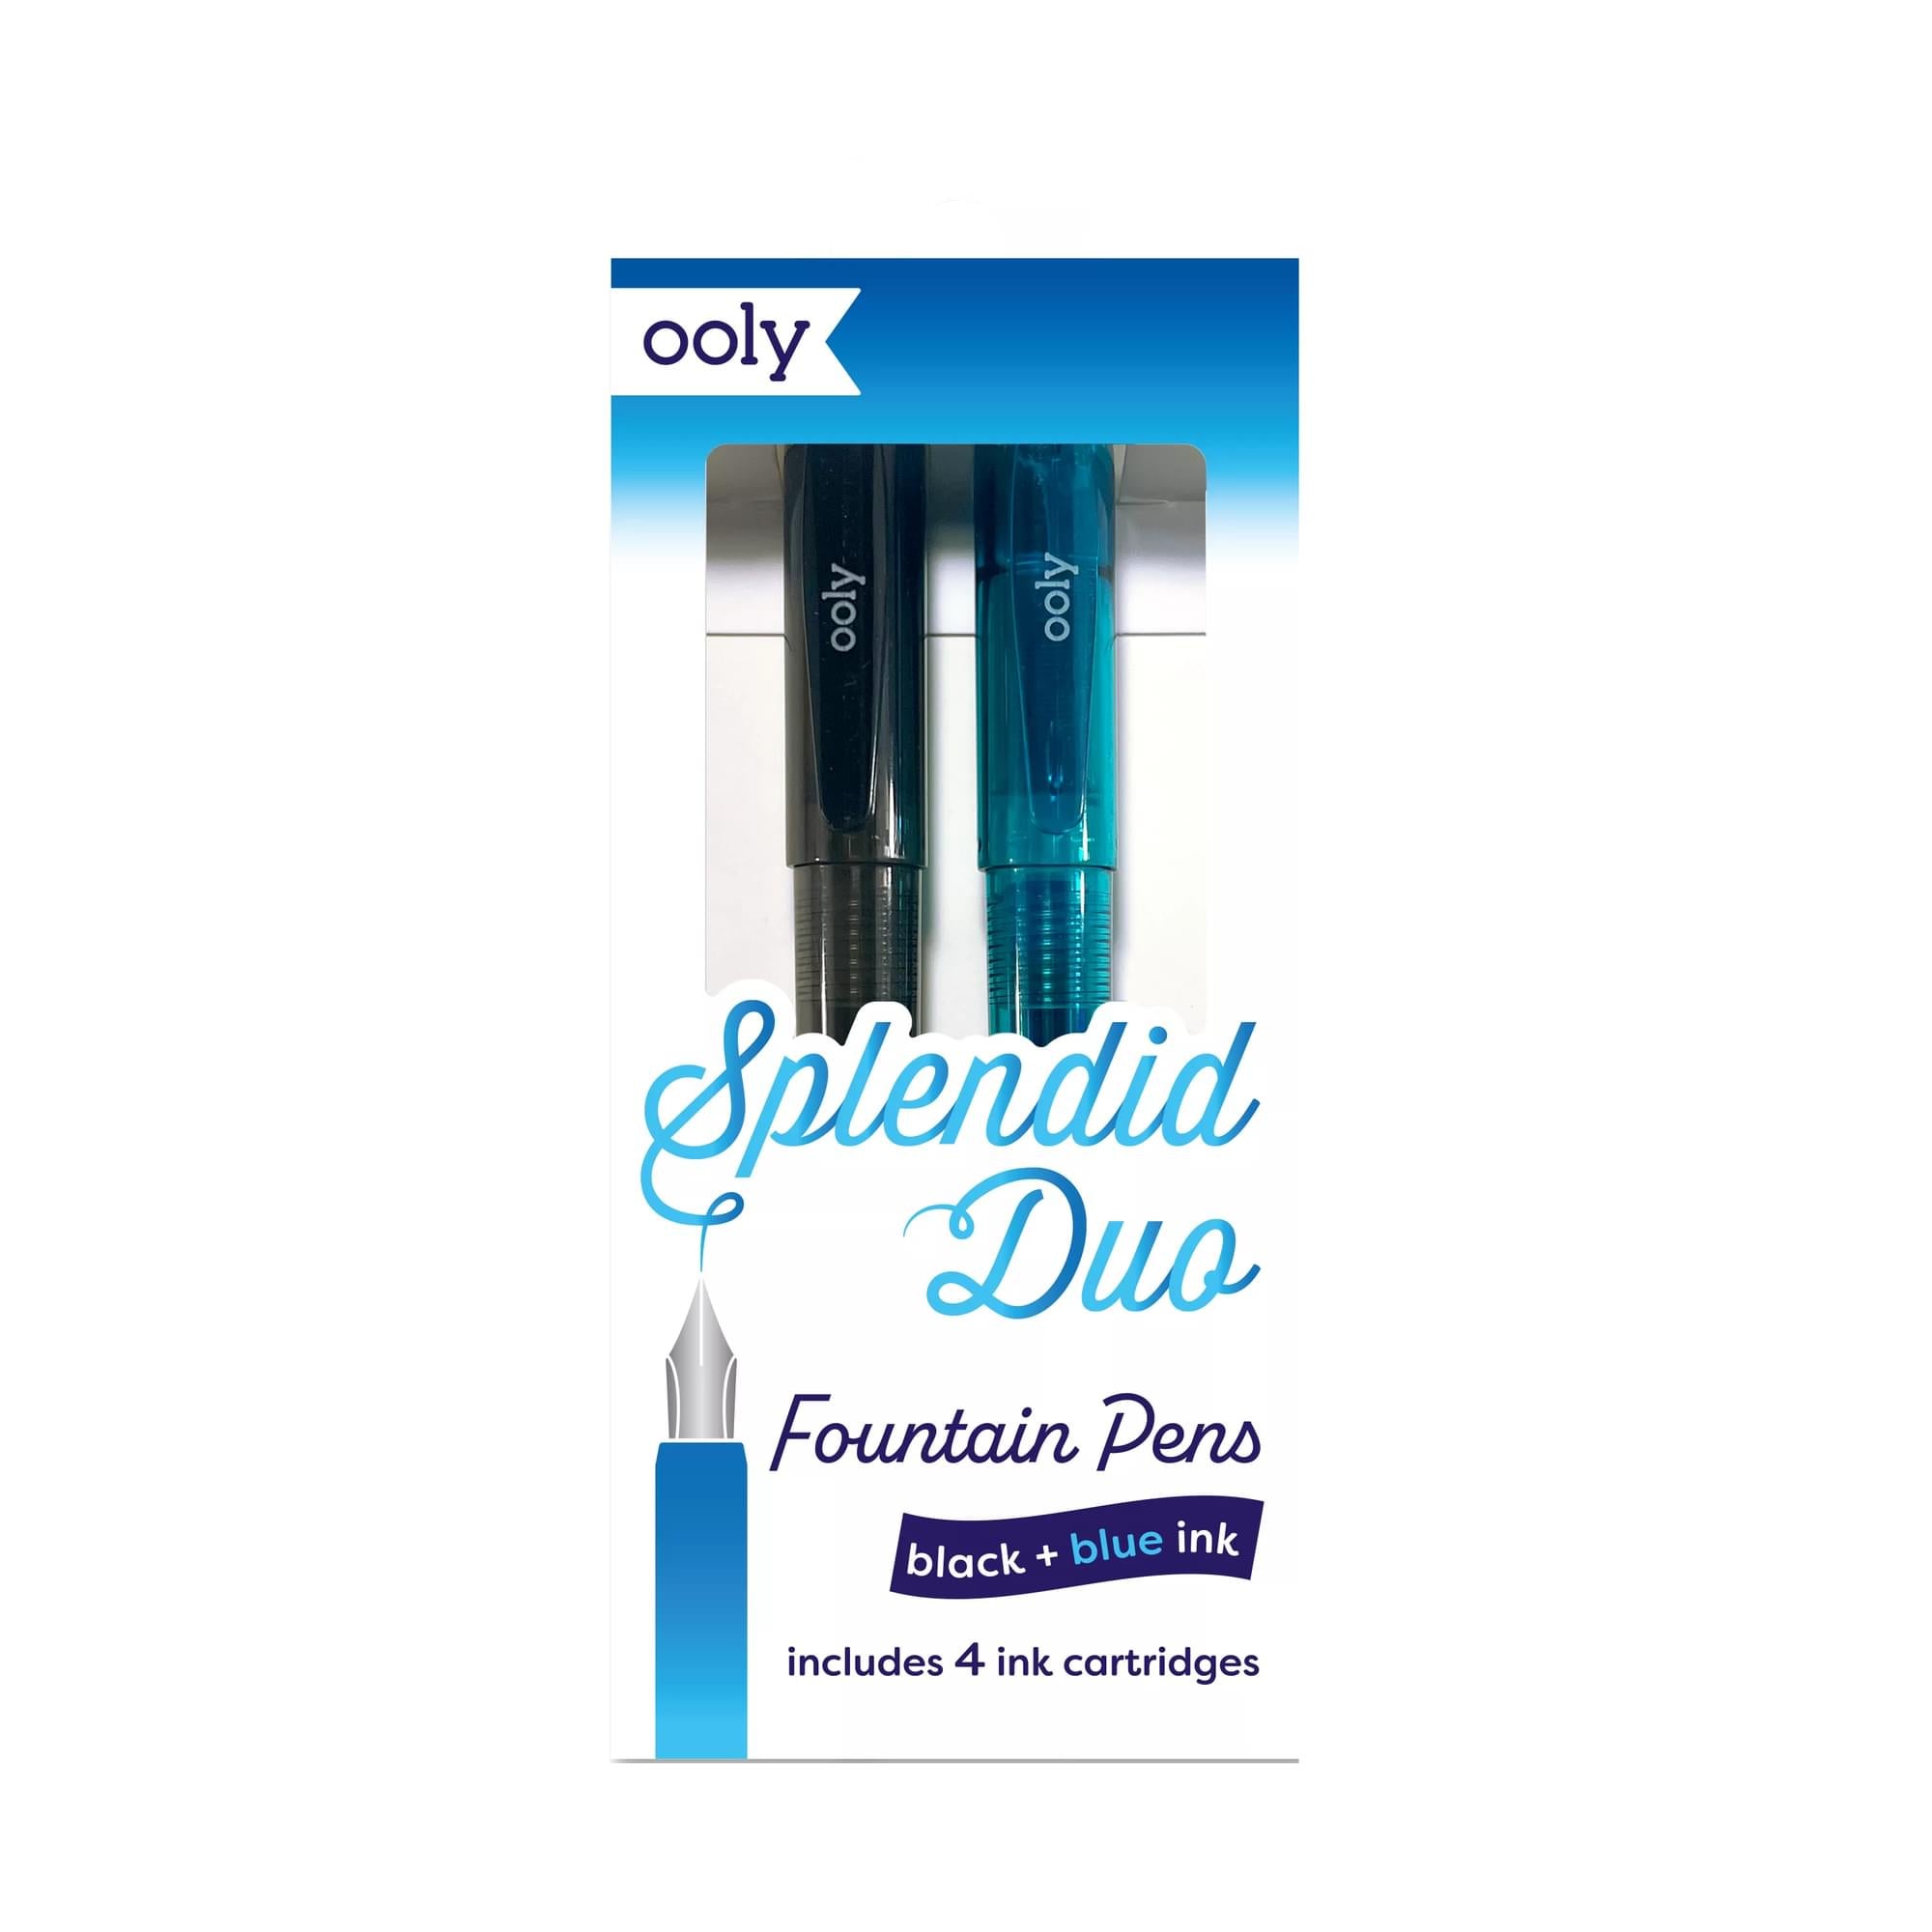 OOLY Splendid Duo - Fountain Pens - Black & Blue Ink front of packaging